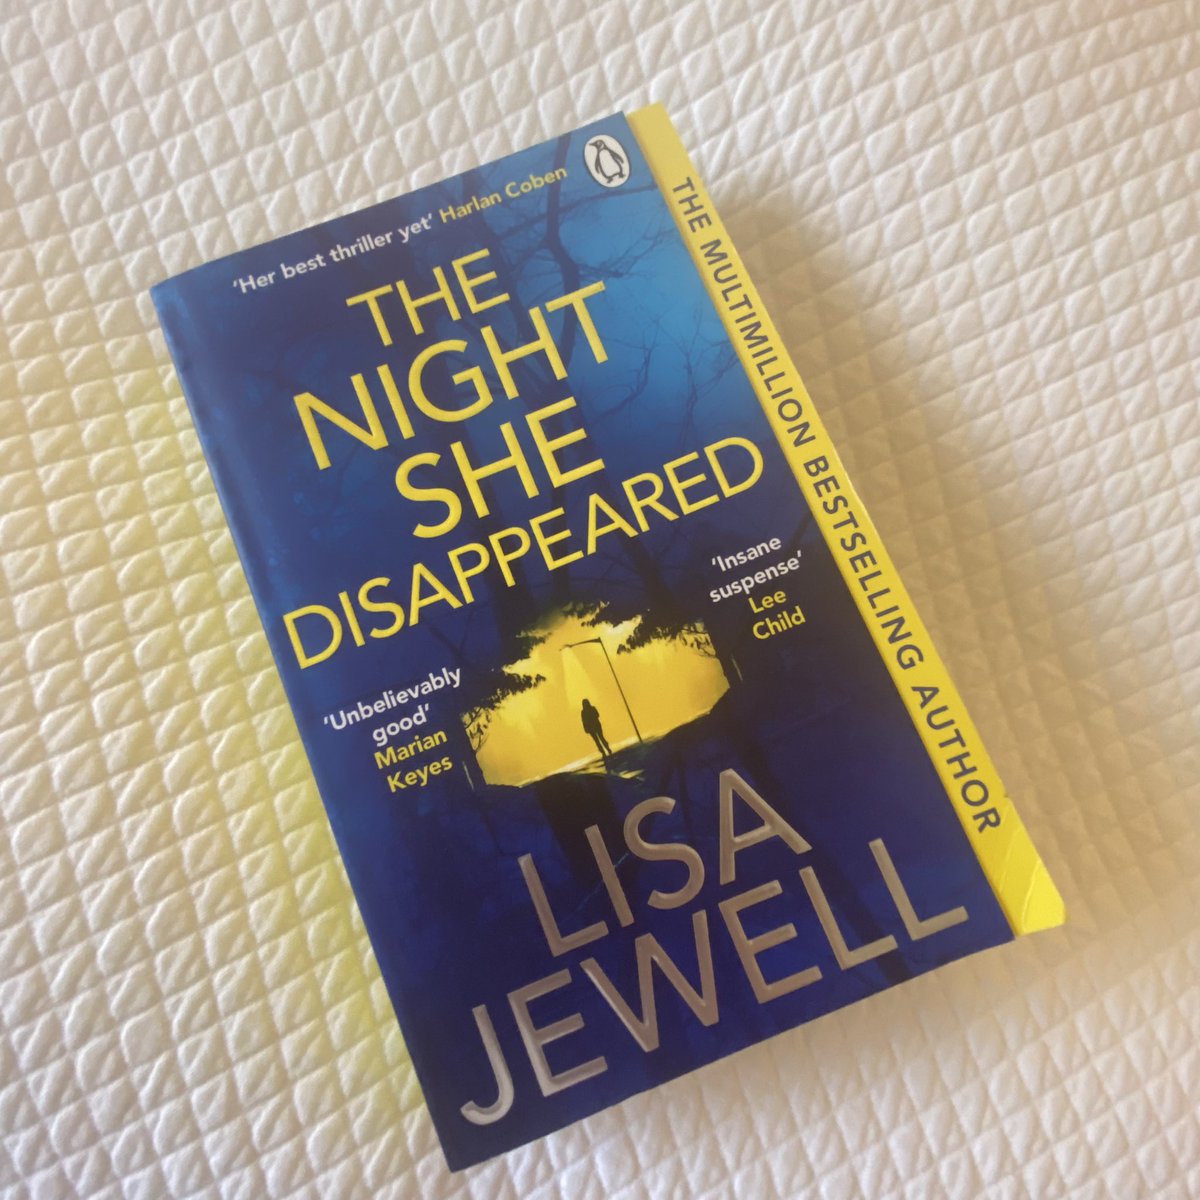 Can’t recommend @lisajewelluk’s latest more. I blasted through #TheNightSheDisappeared in two days. It’s totally compulsive - a masterclass in pacing and suspense.